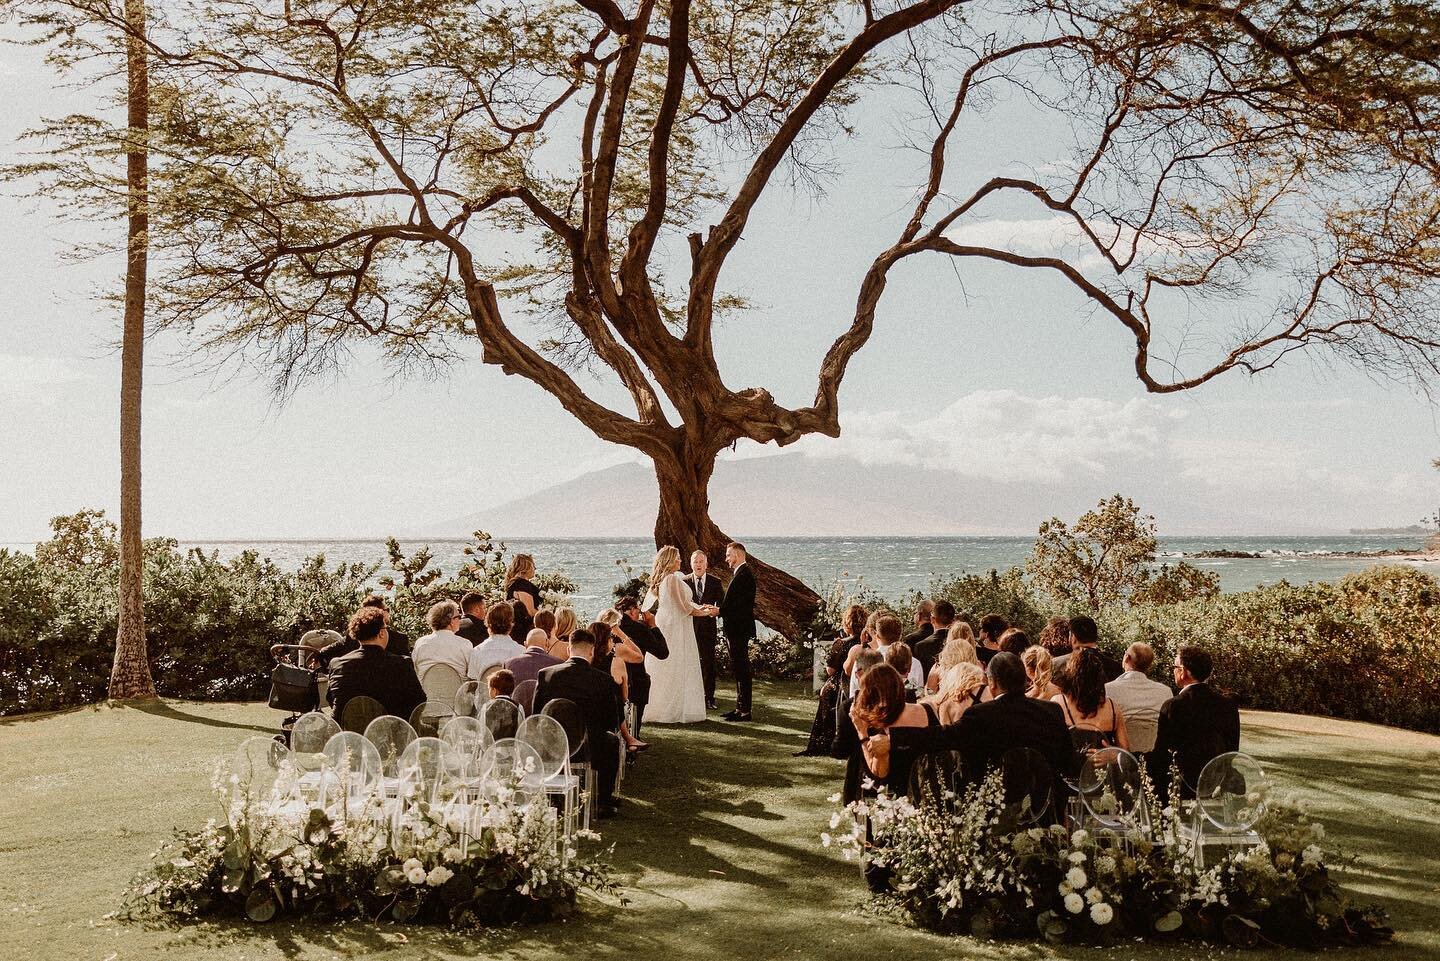 Take us back to @andazmaui! We absolutely loved planning this intimate beachside ceremony in Maui. We wanted to create a modern tropical vibe with black and white accents to suite Kendall and Damion&rsquo;s personal style. #stylishdetailsevents

Wedd